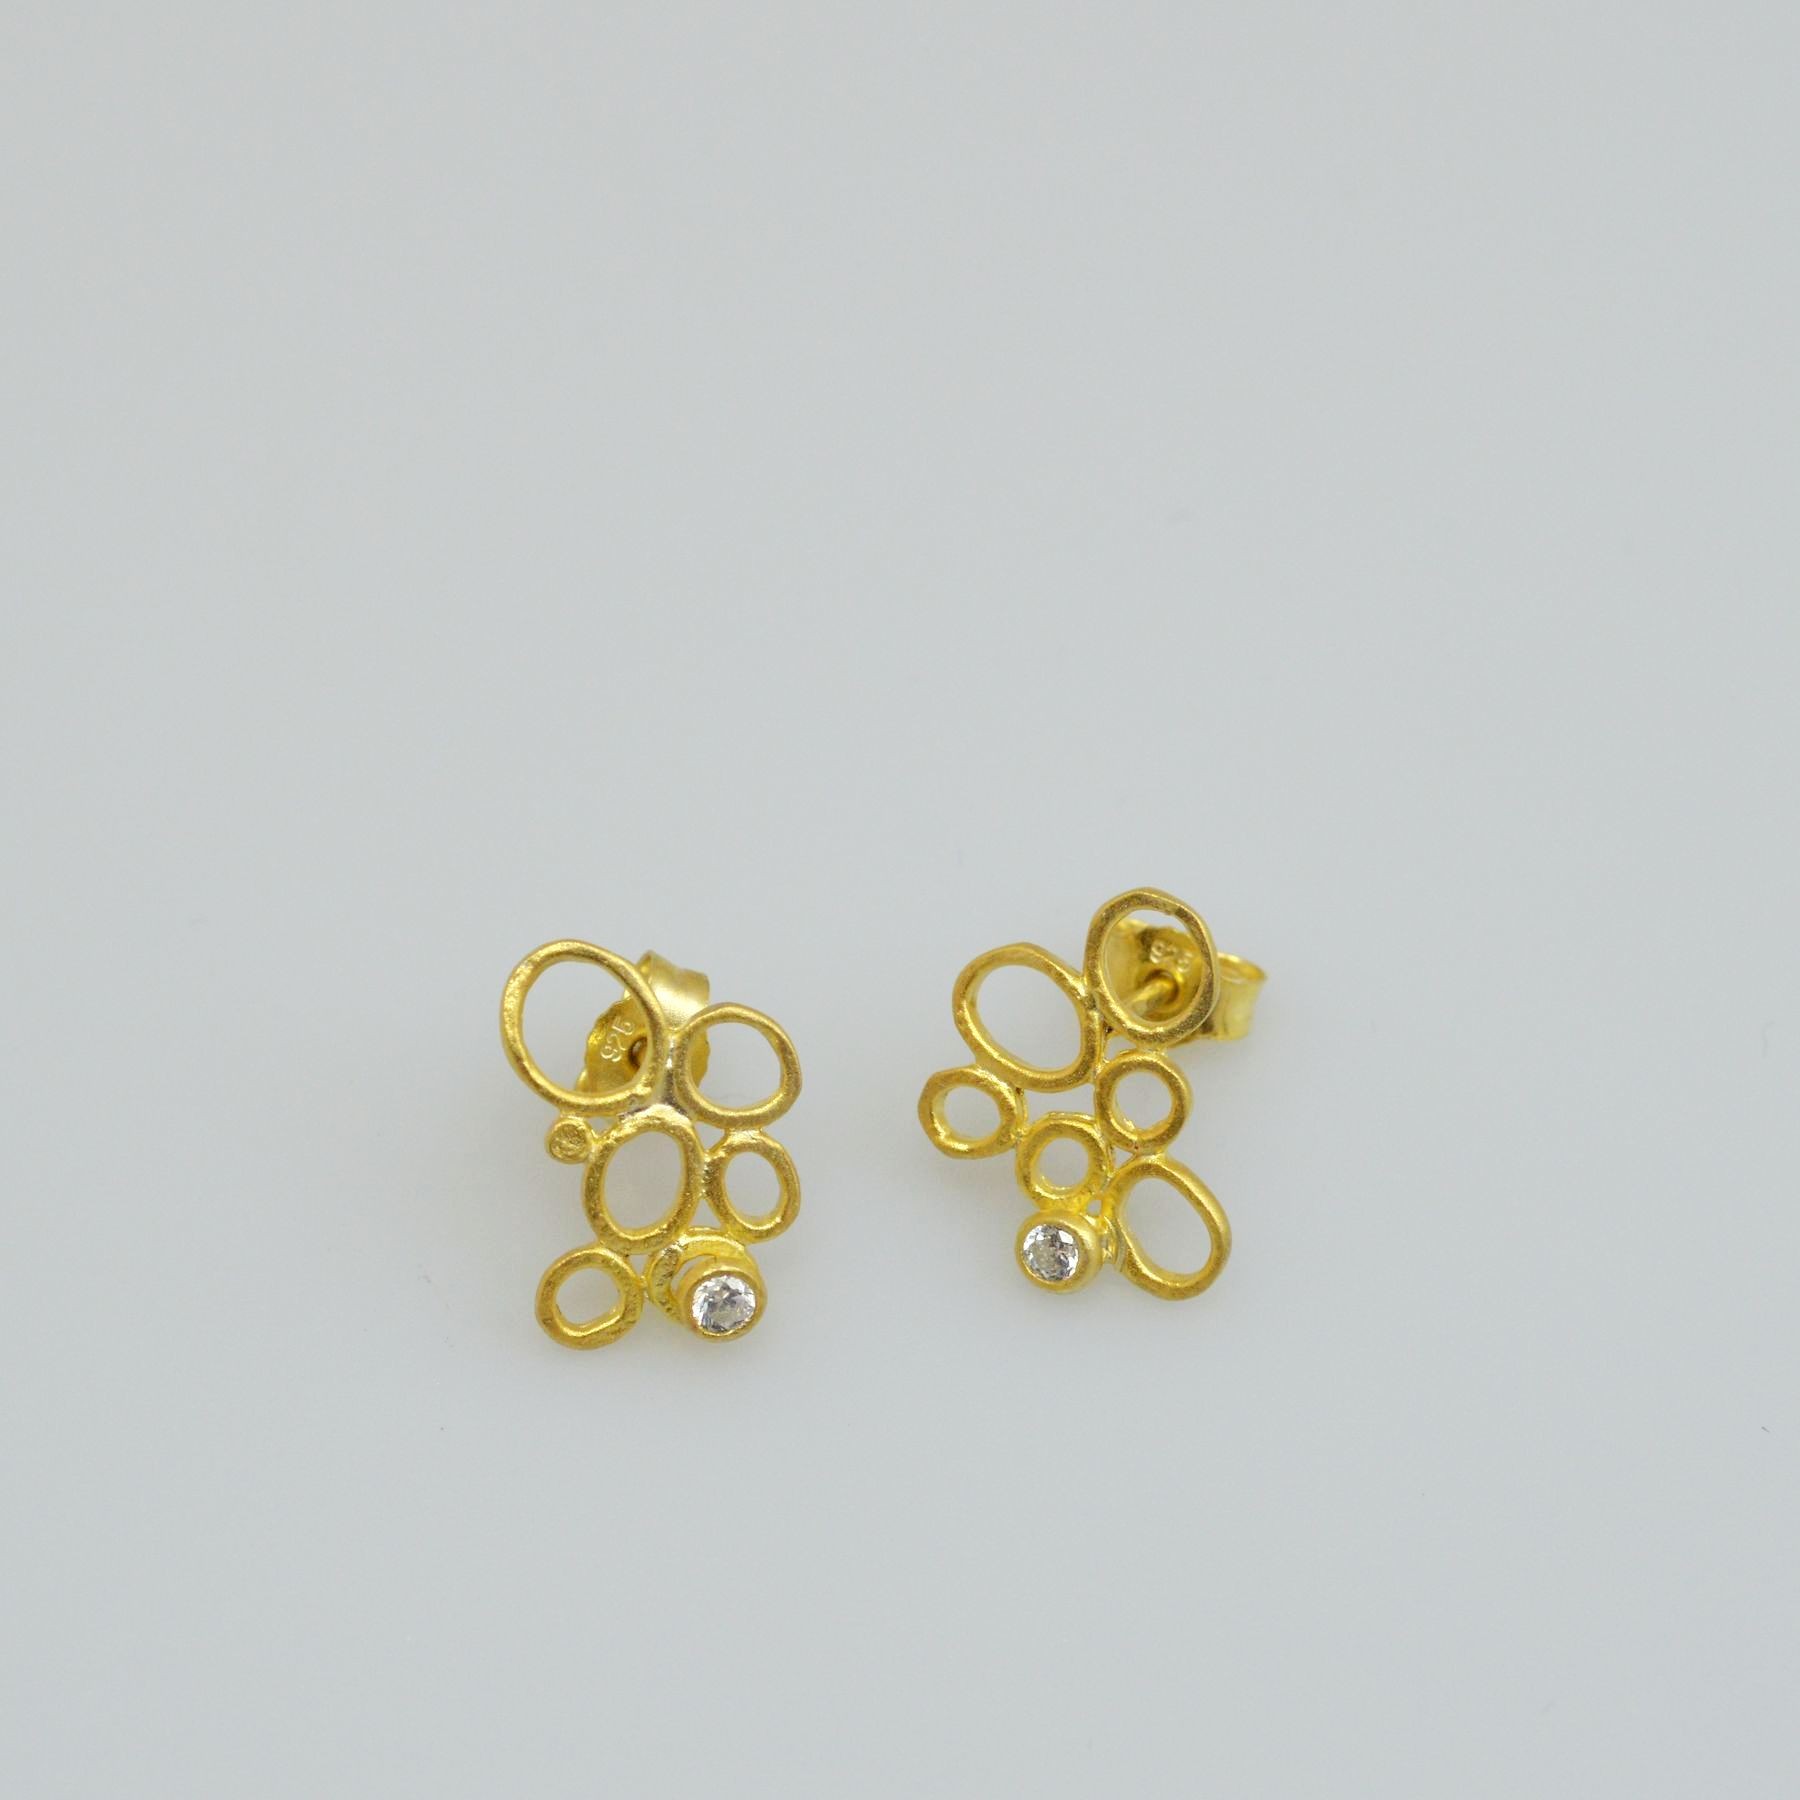 Silver earrings 925 gold plated